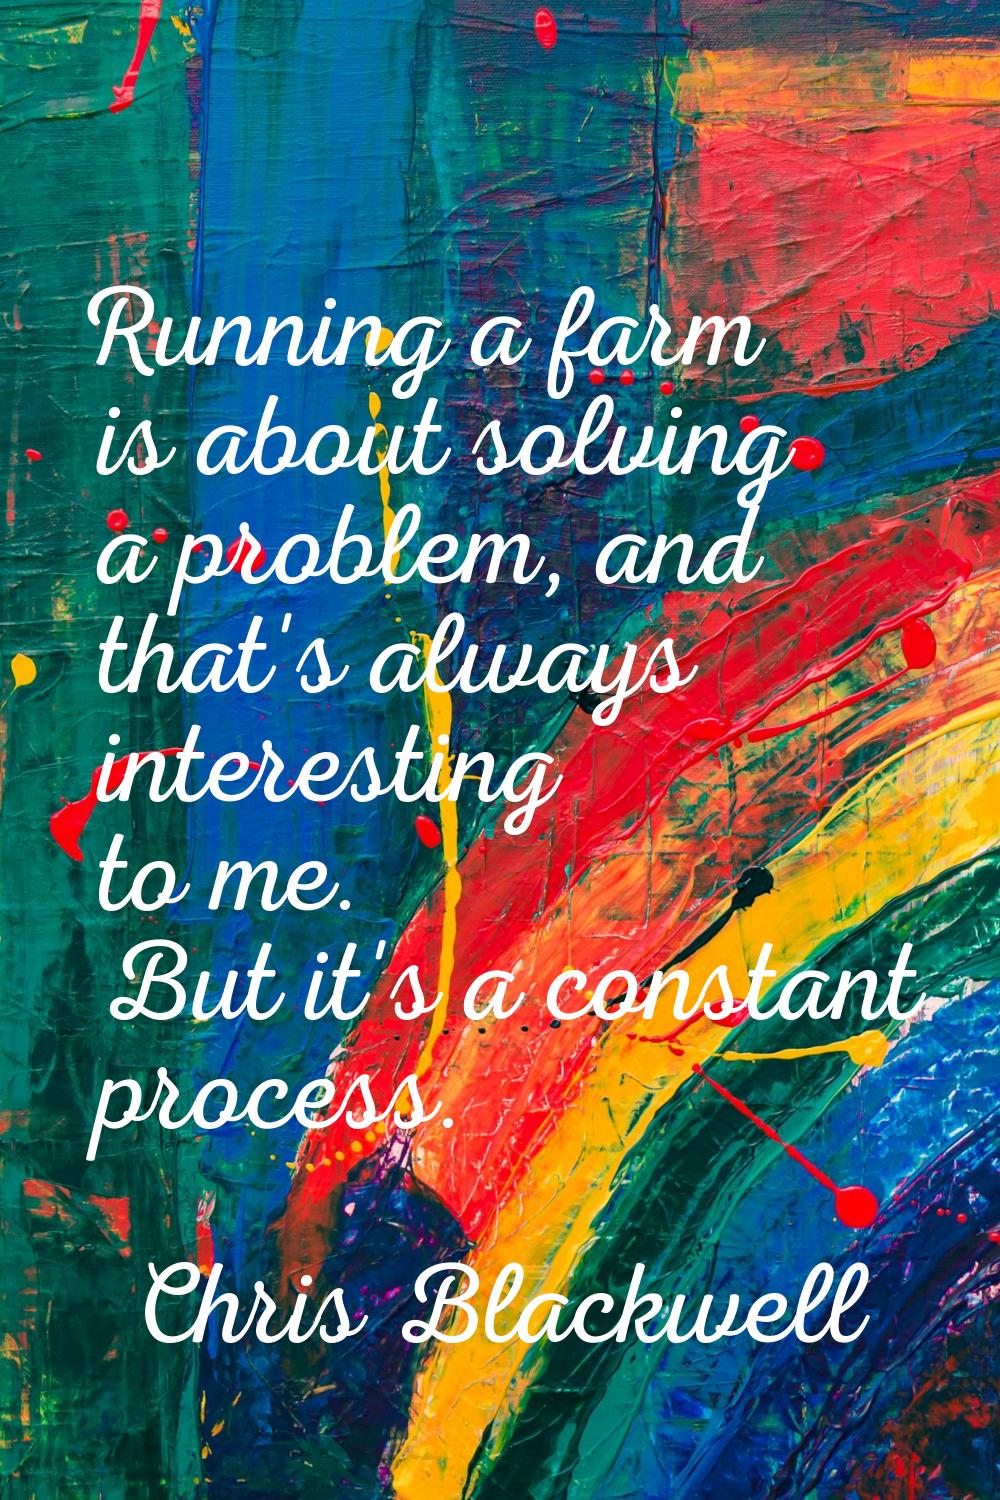 Running a farm is about solving a problem, and that's always interesting to me. But it's a constant